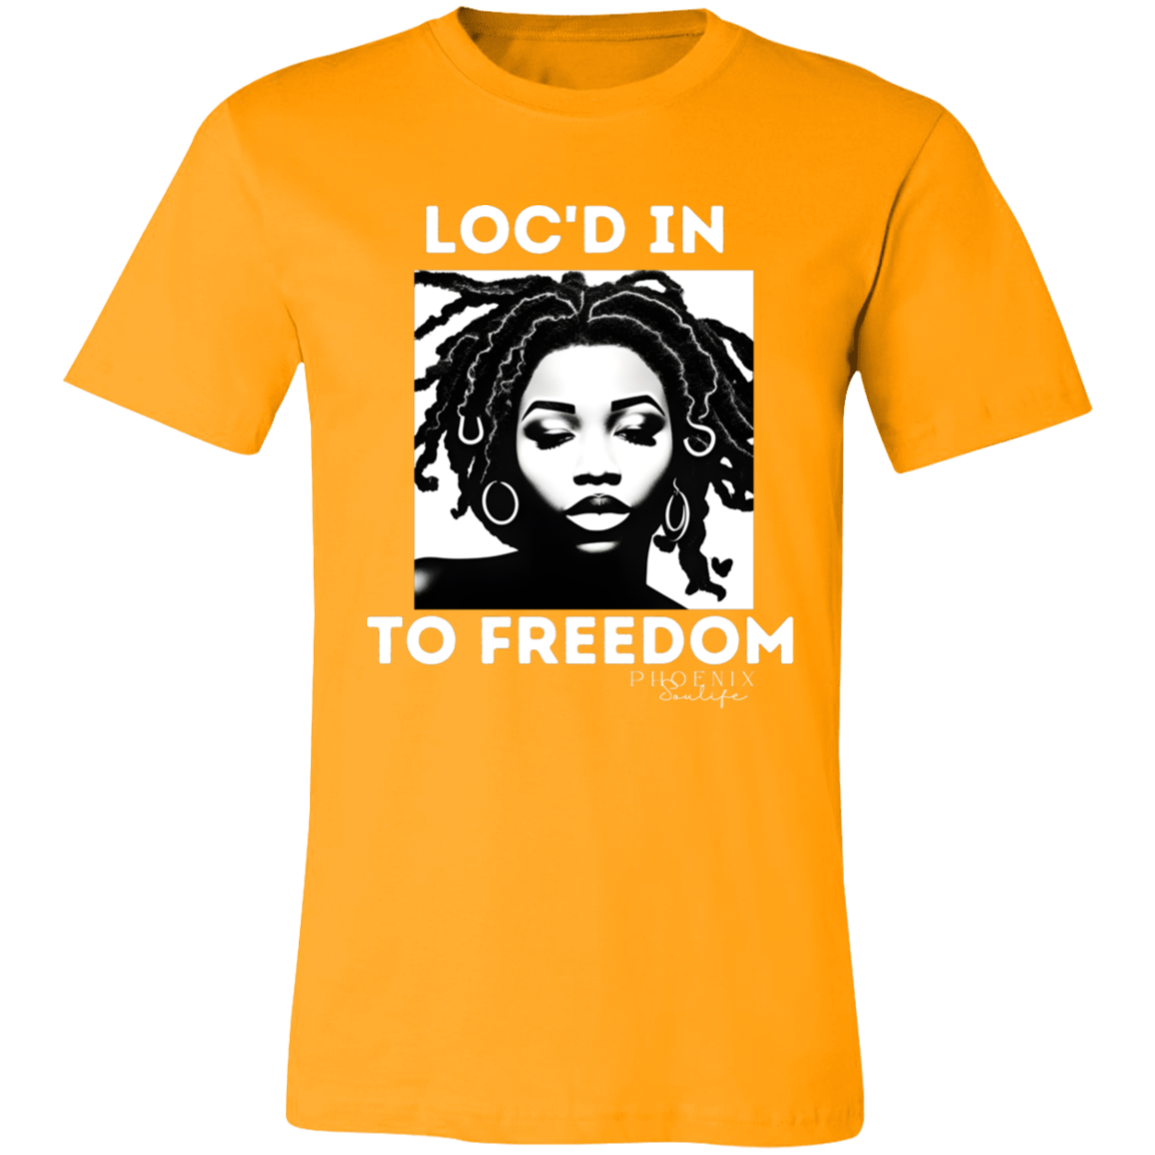 Loc'd In to Freedom T-Shirt